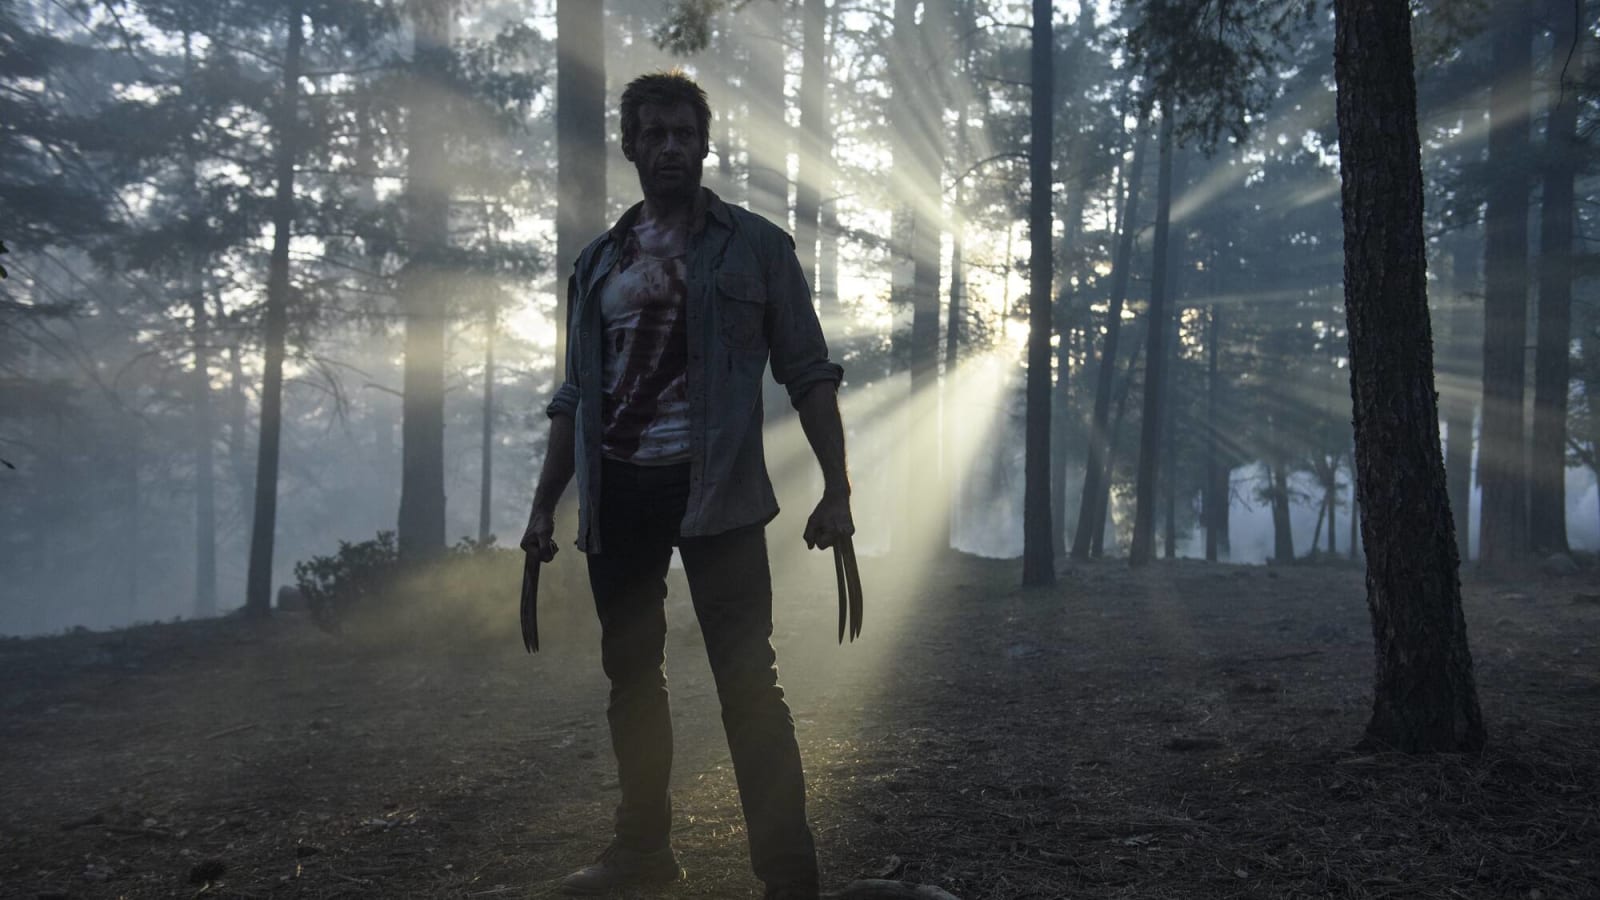 20 facts you might not know about 'Logan'